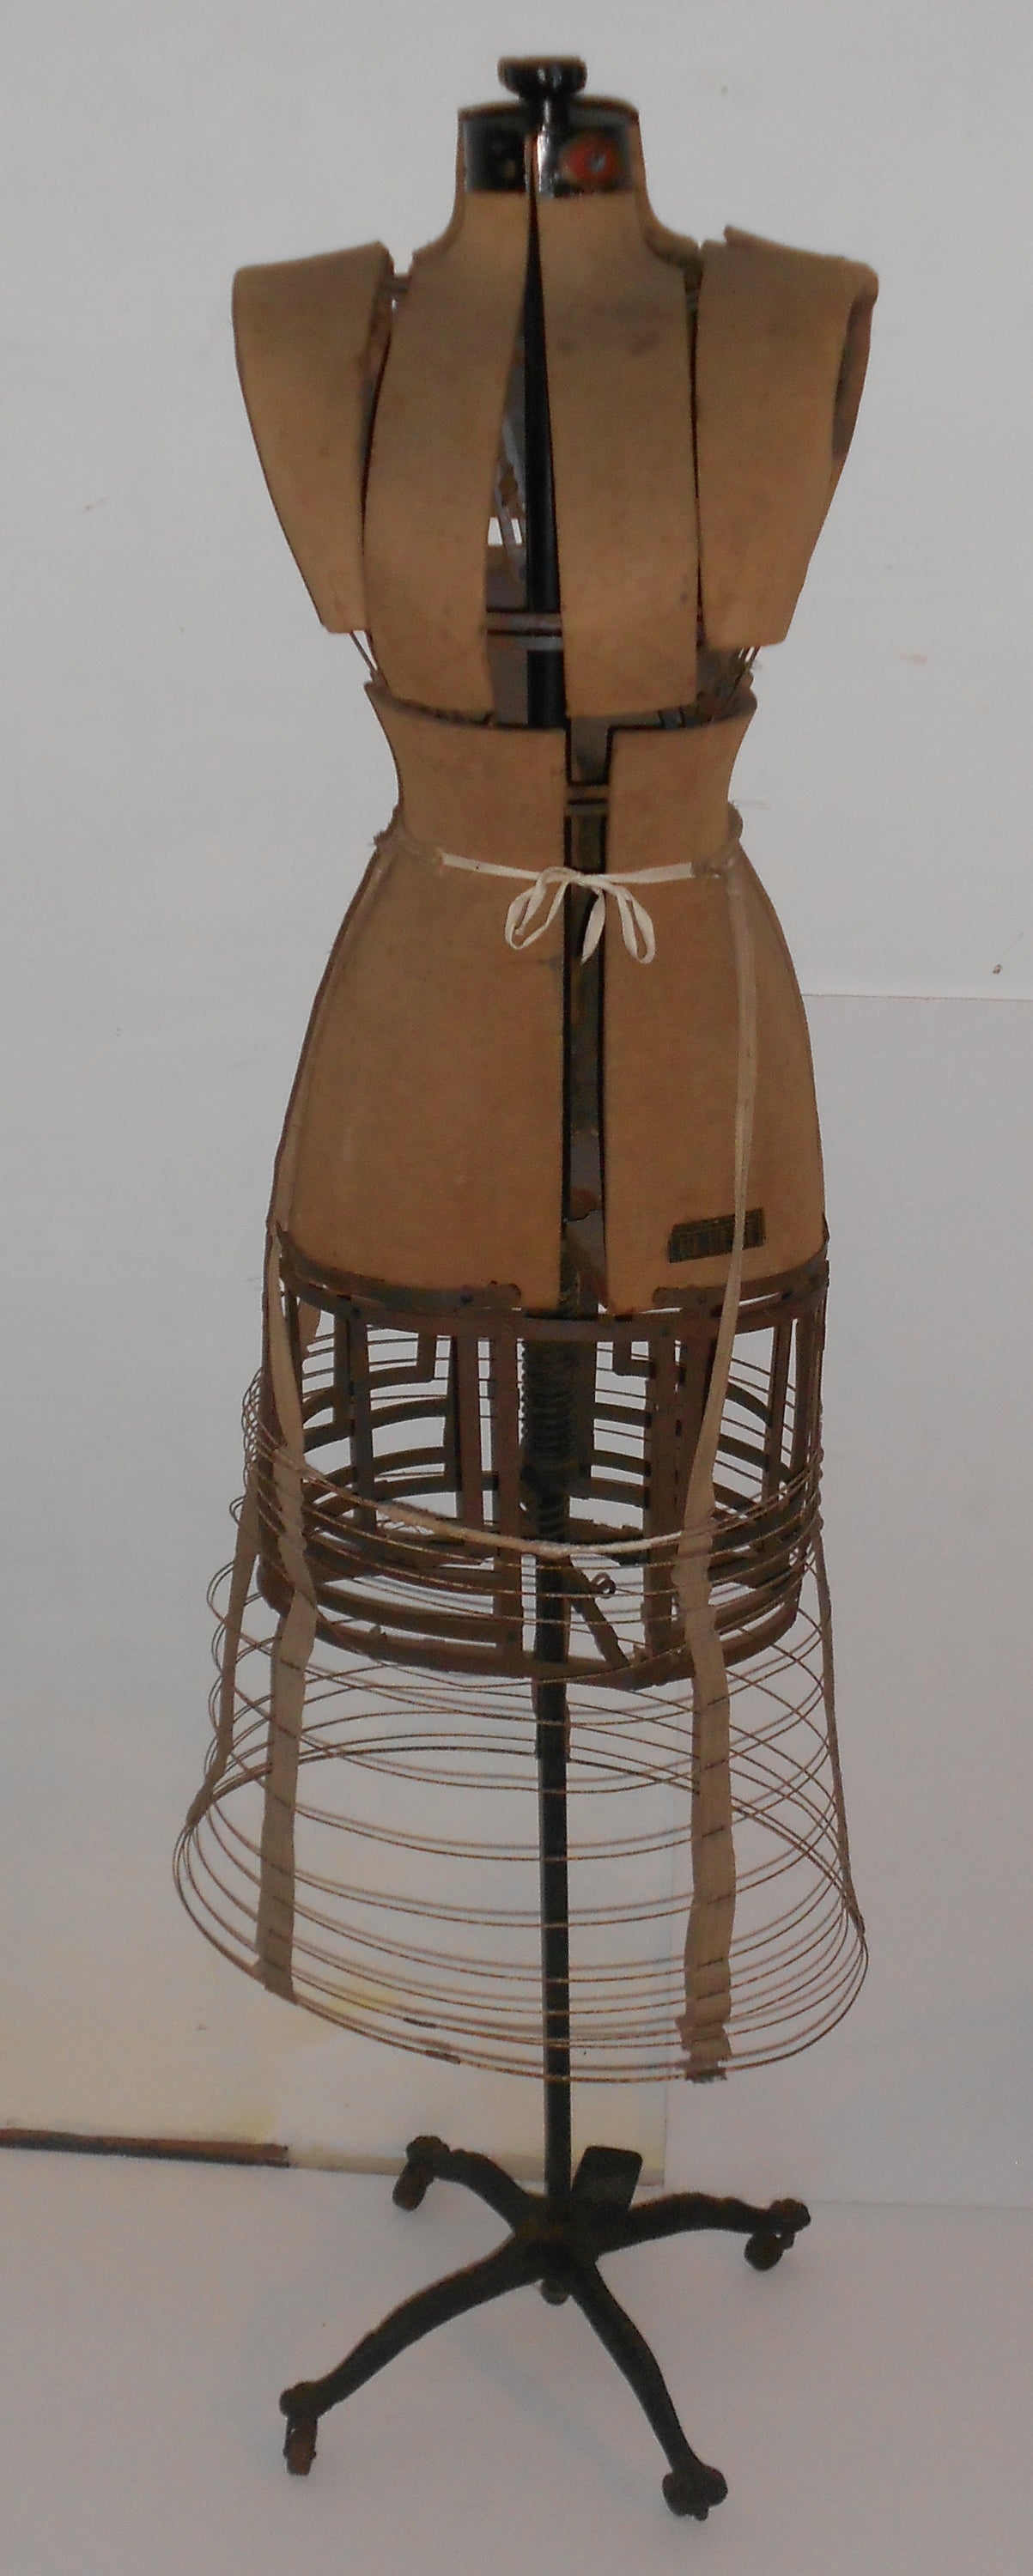 Early 20th century dress form from New York City